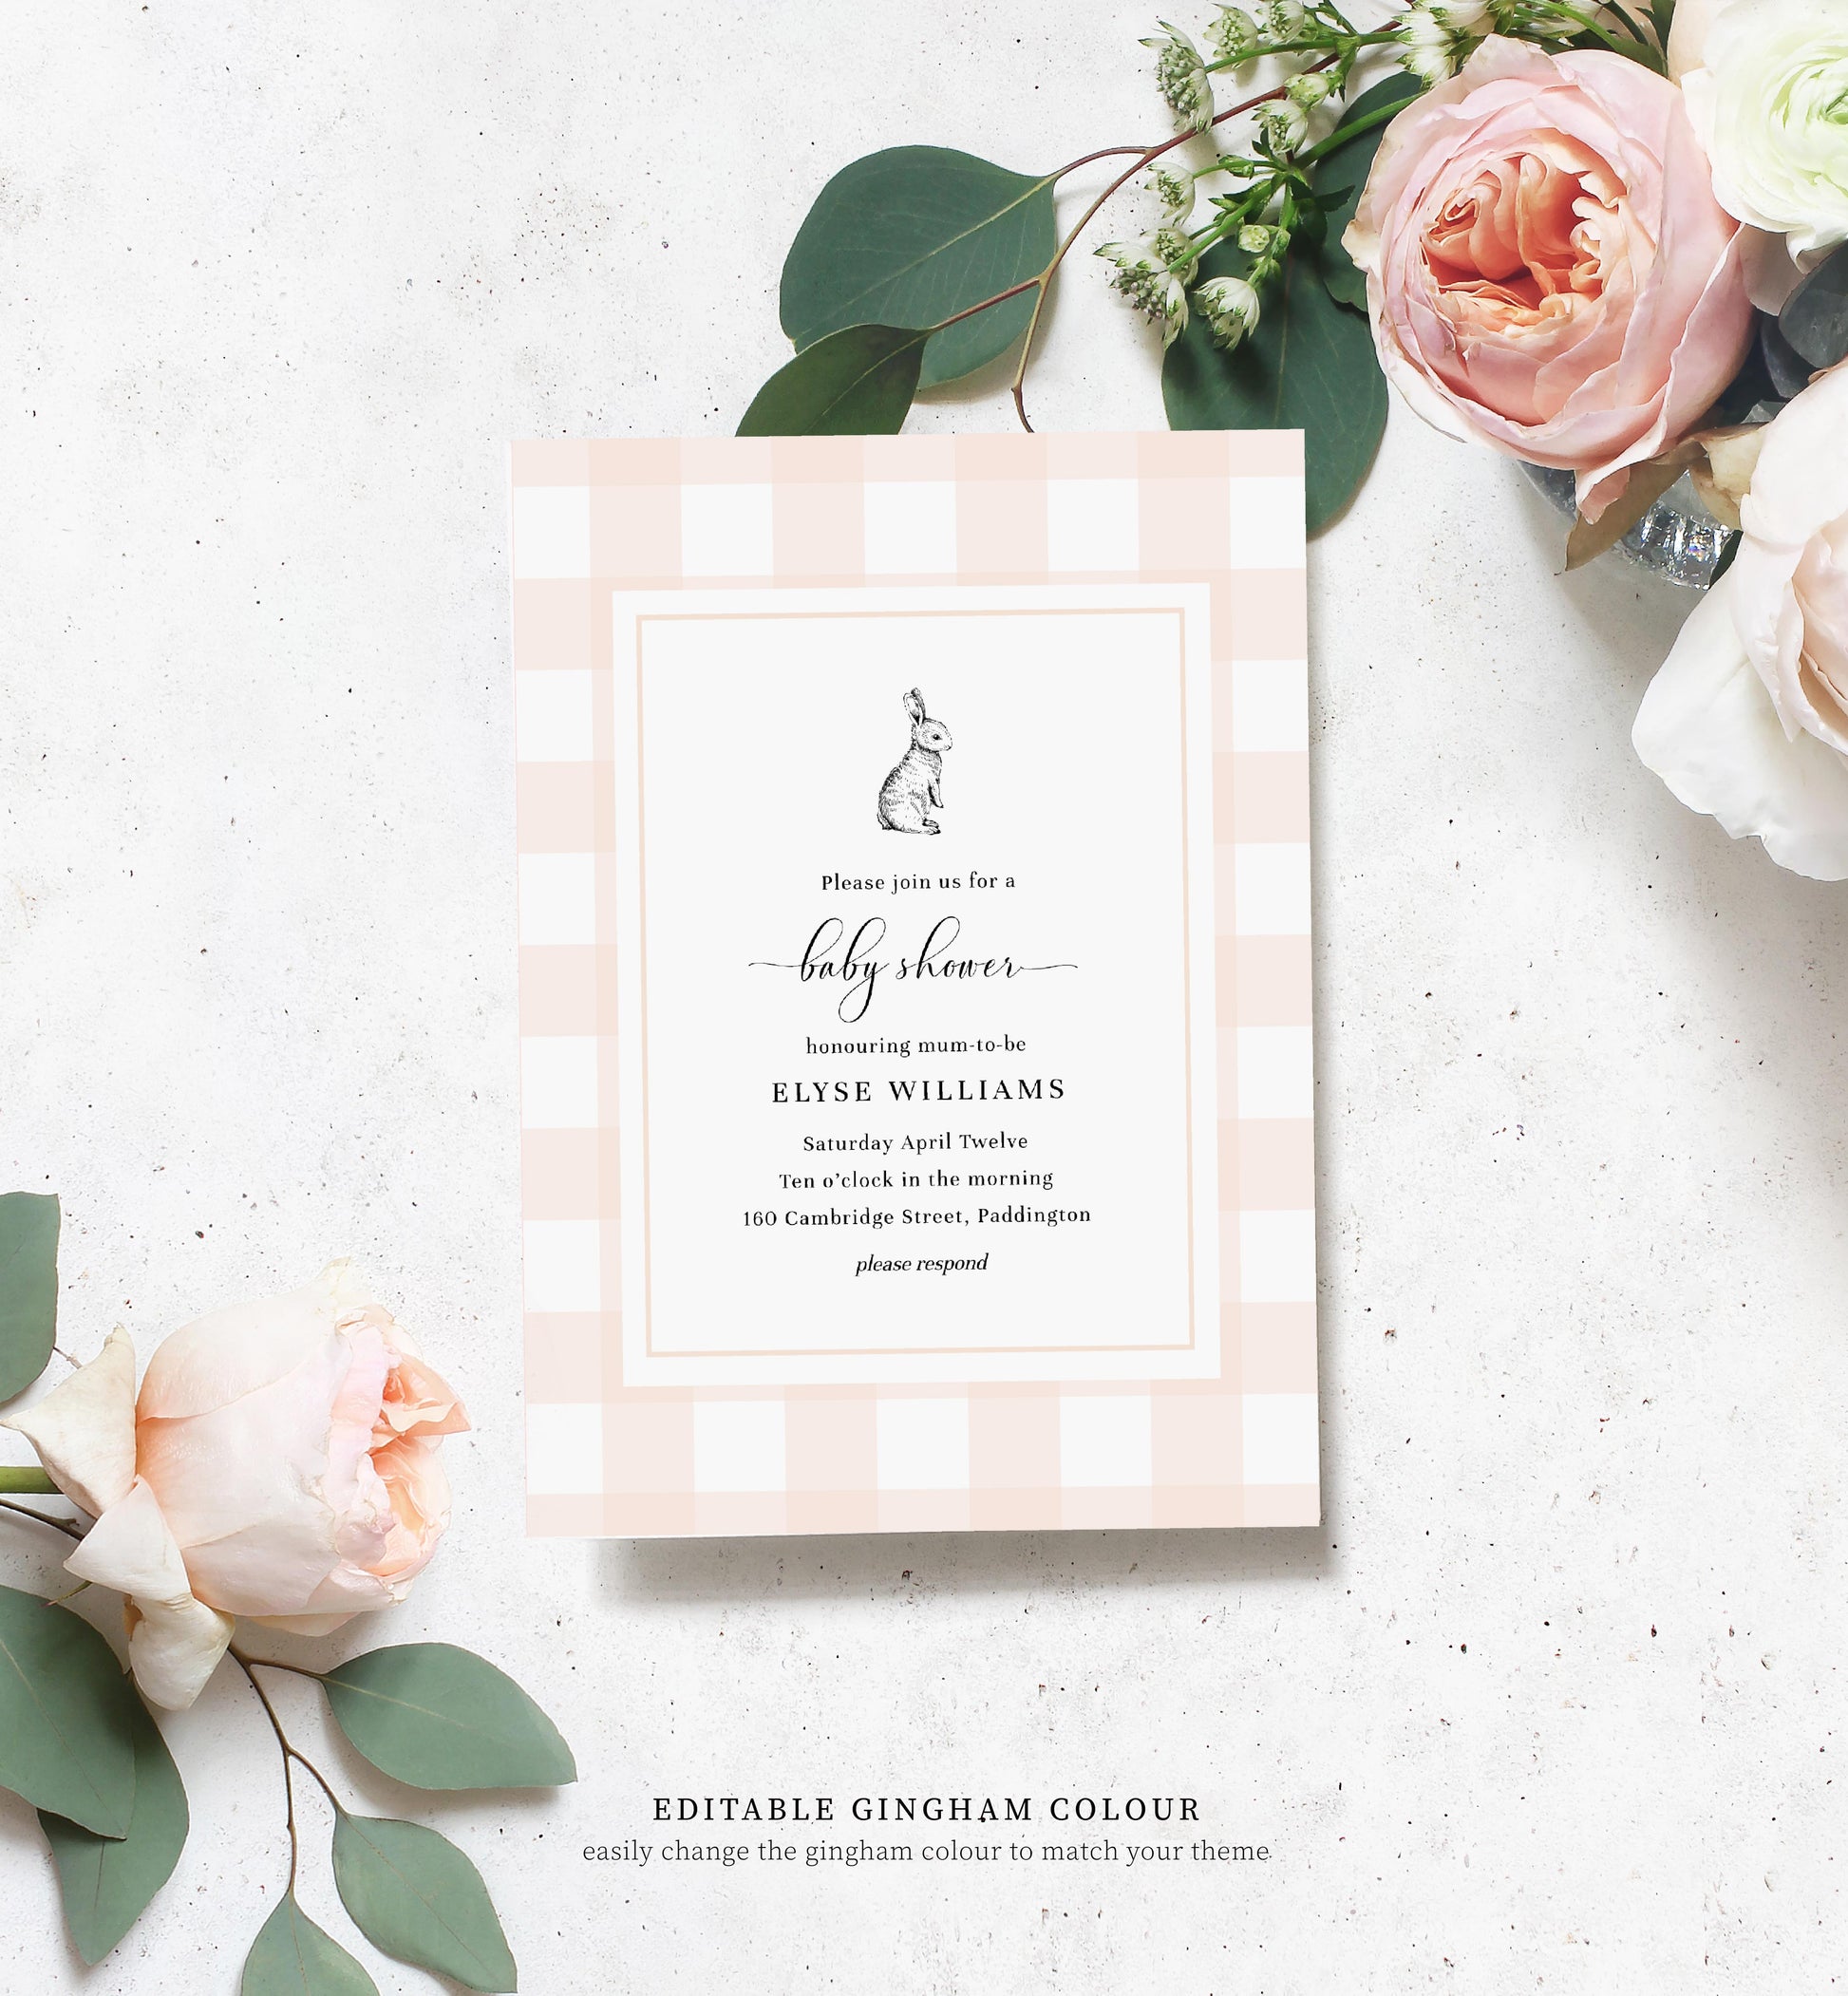 Gingham Blue Bunny | Printable Baby Shower Invitation Suite Template - Black Bow Studio